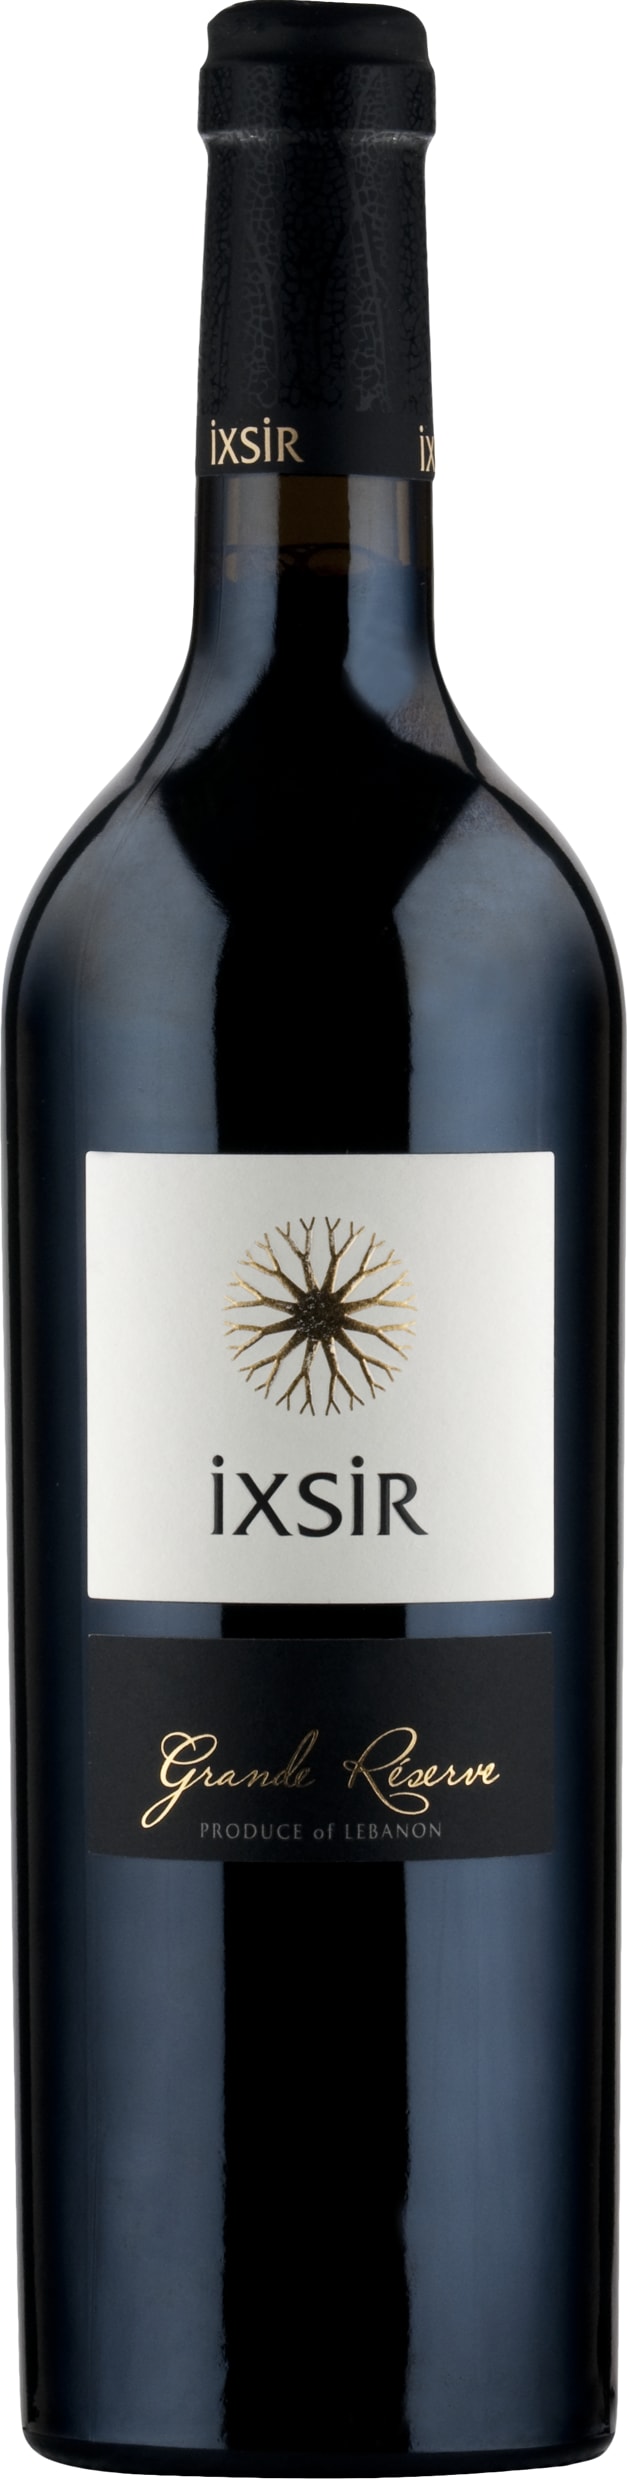 Ixsir Grande Reserve Red 2016 75cl - Buy Ixsir Wines from GREAT WINES DIRECT wine shop